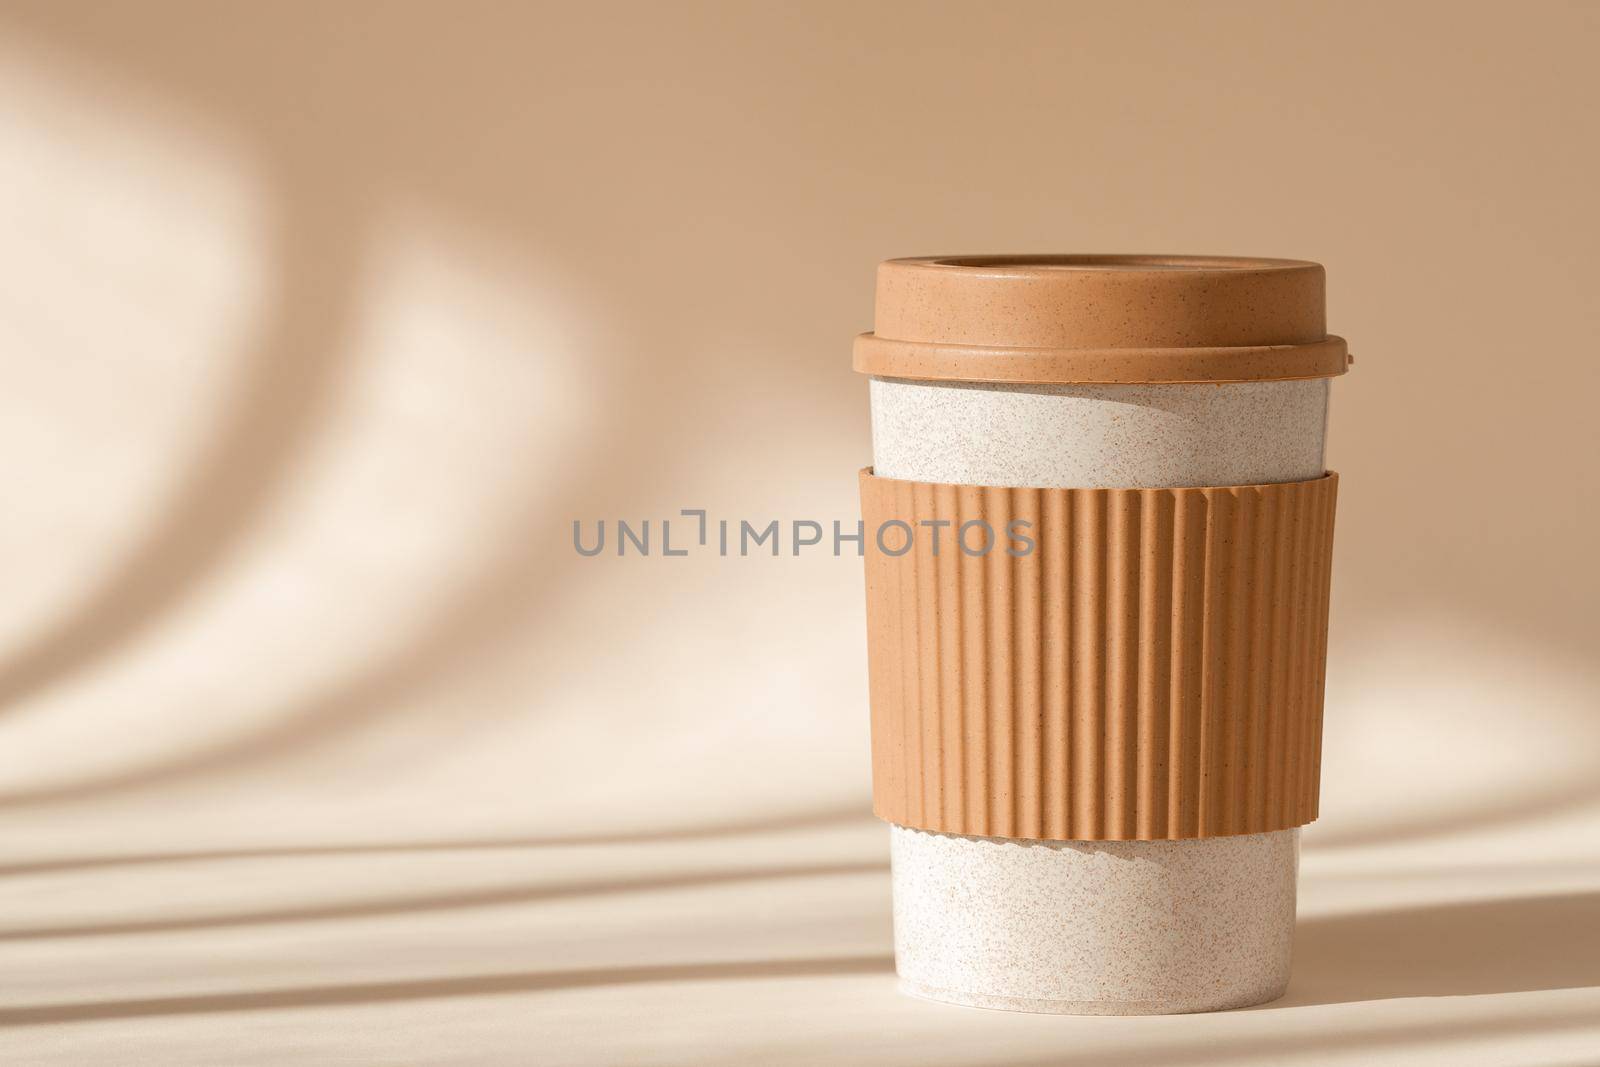 Reusable cup, biodegradable travel plastic coffee mug for take away. Sustainable bamboo eco friendly cup with silicone holder on natural shadow beige background. by photolime